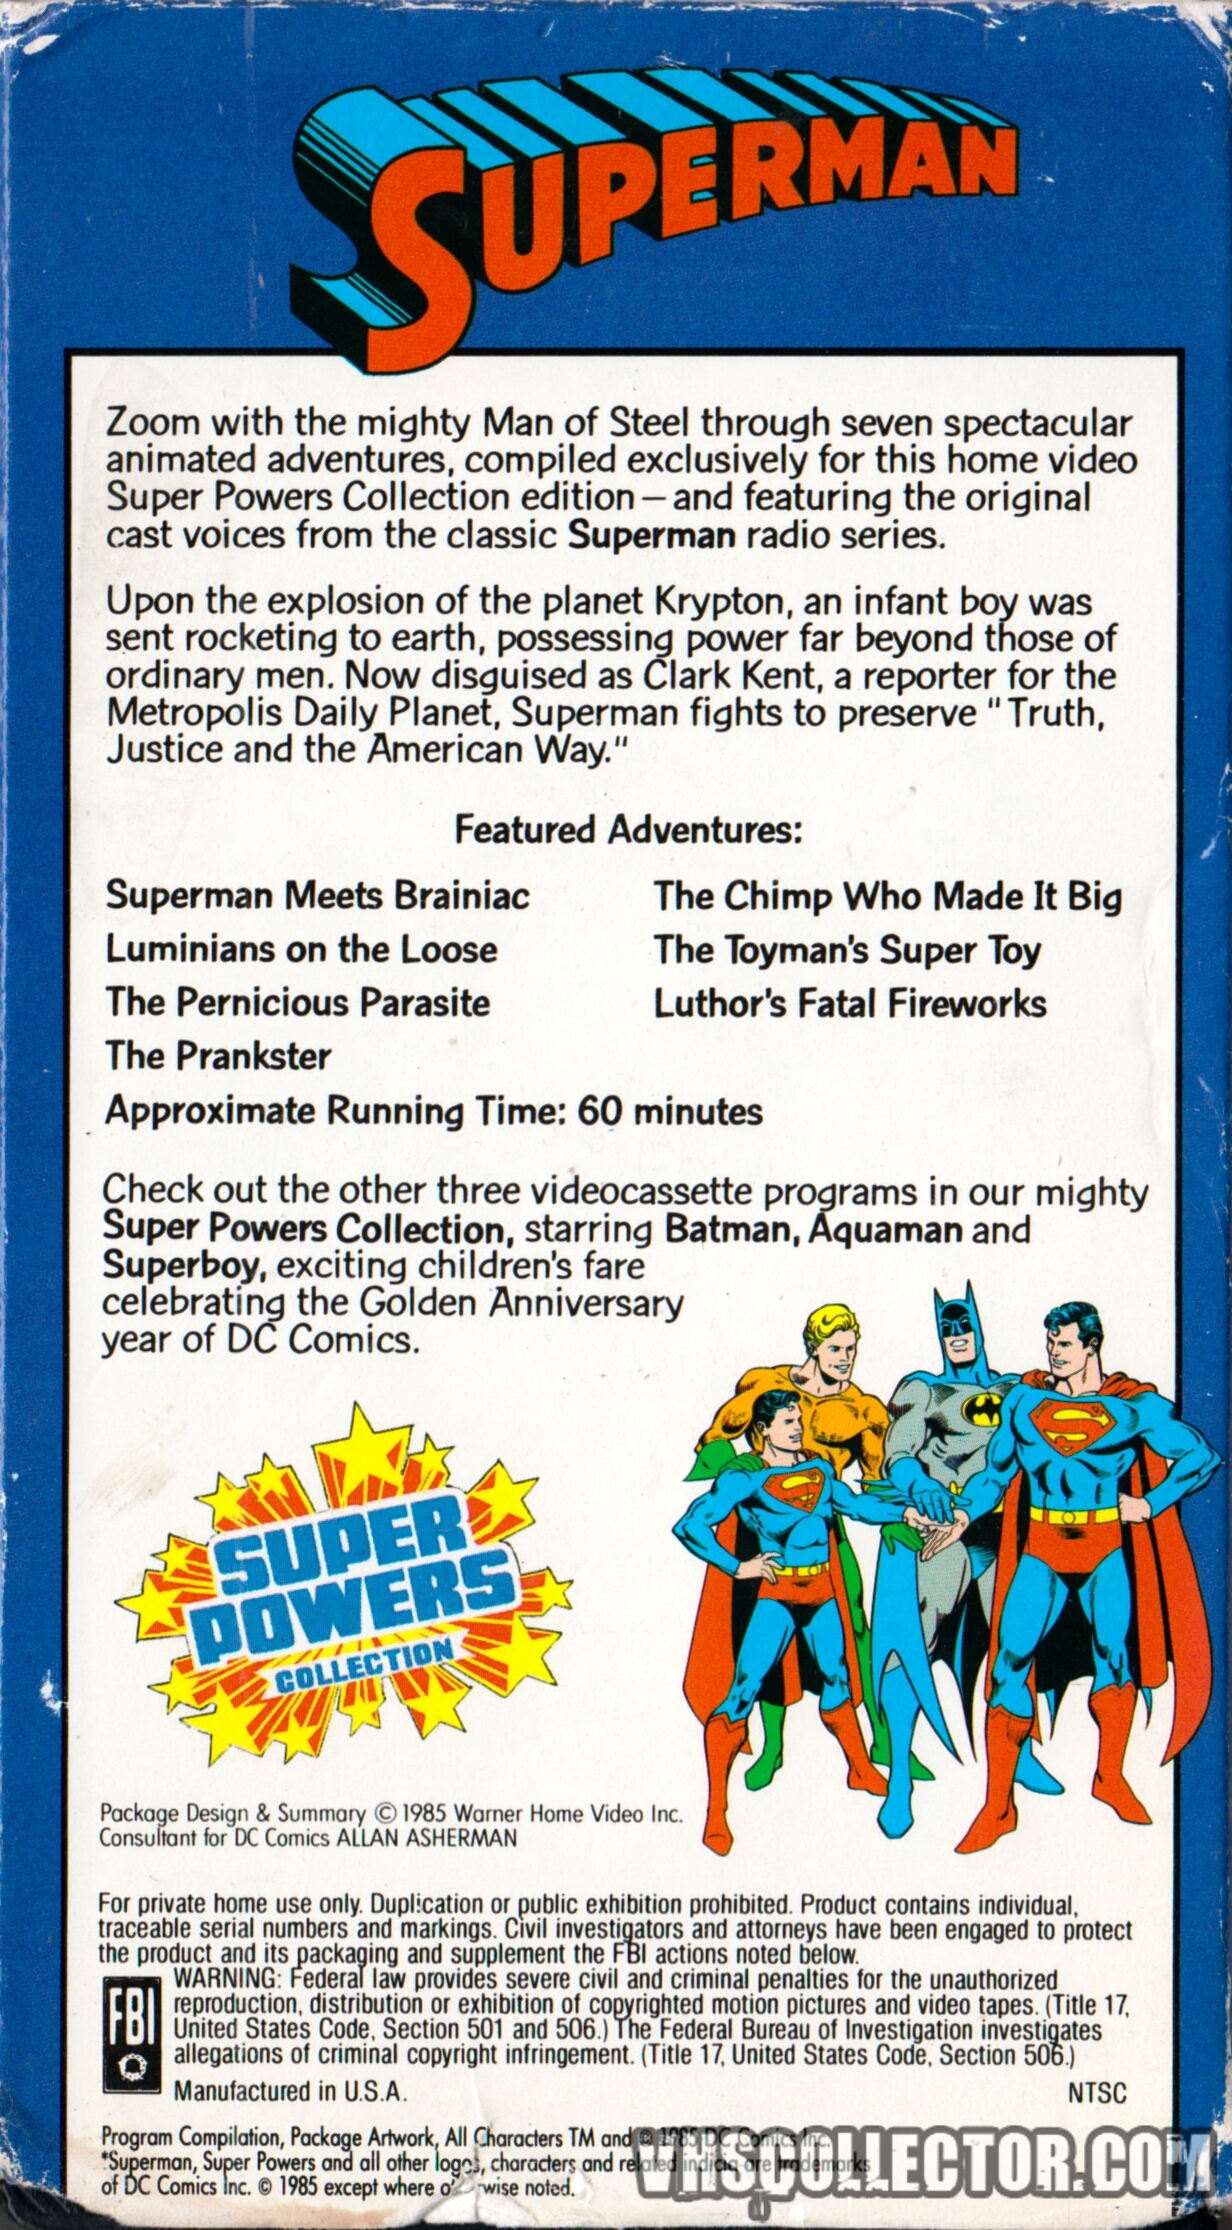 Superman (Super Powers Collection) 